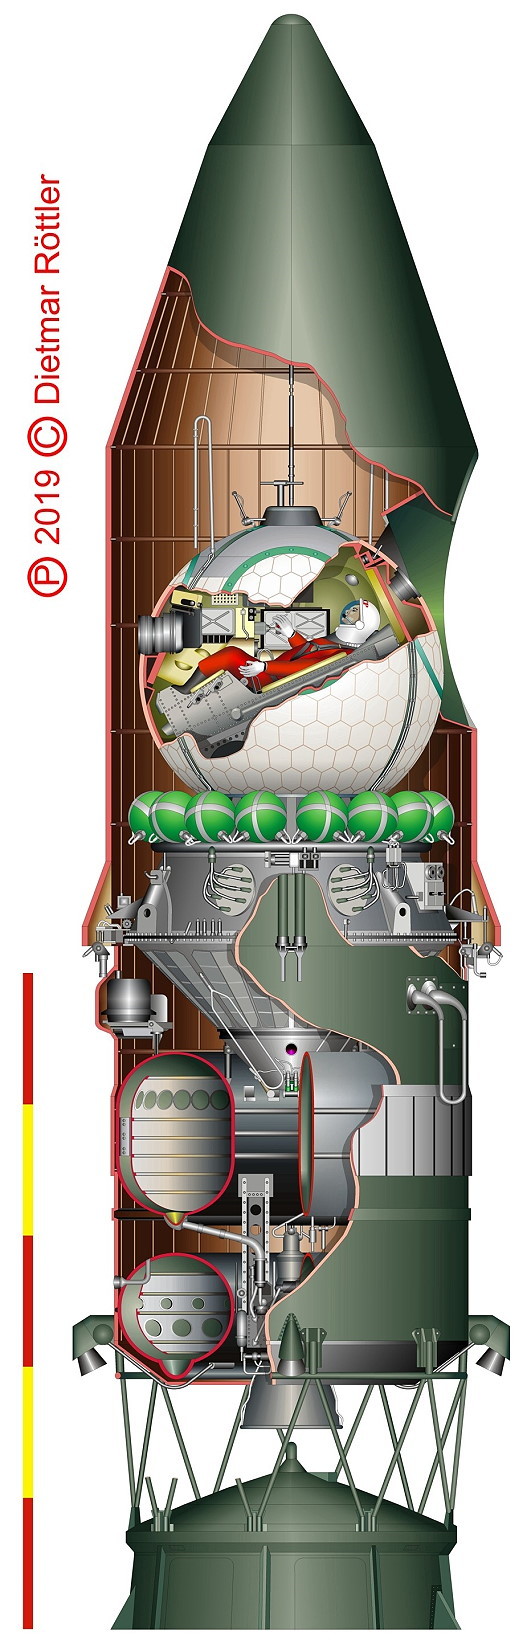 Vostok on the top of the rocket